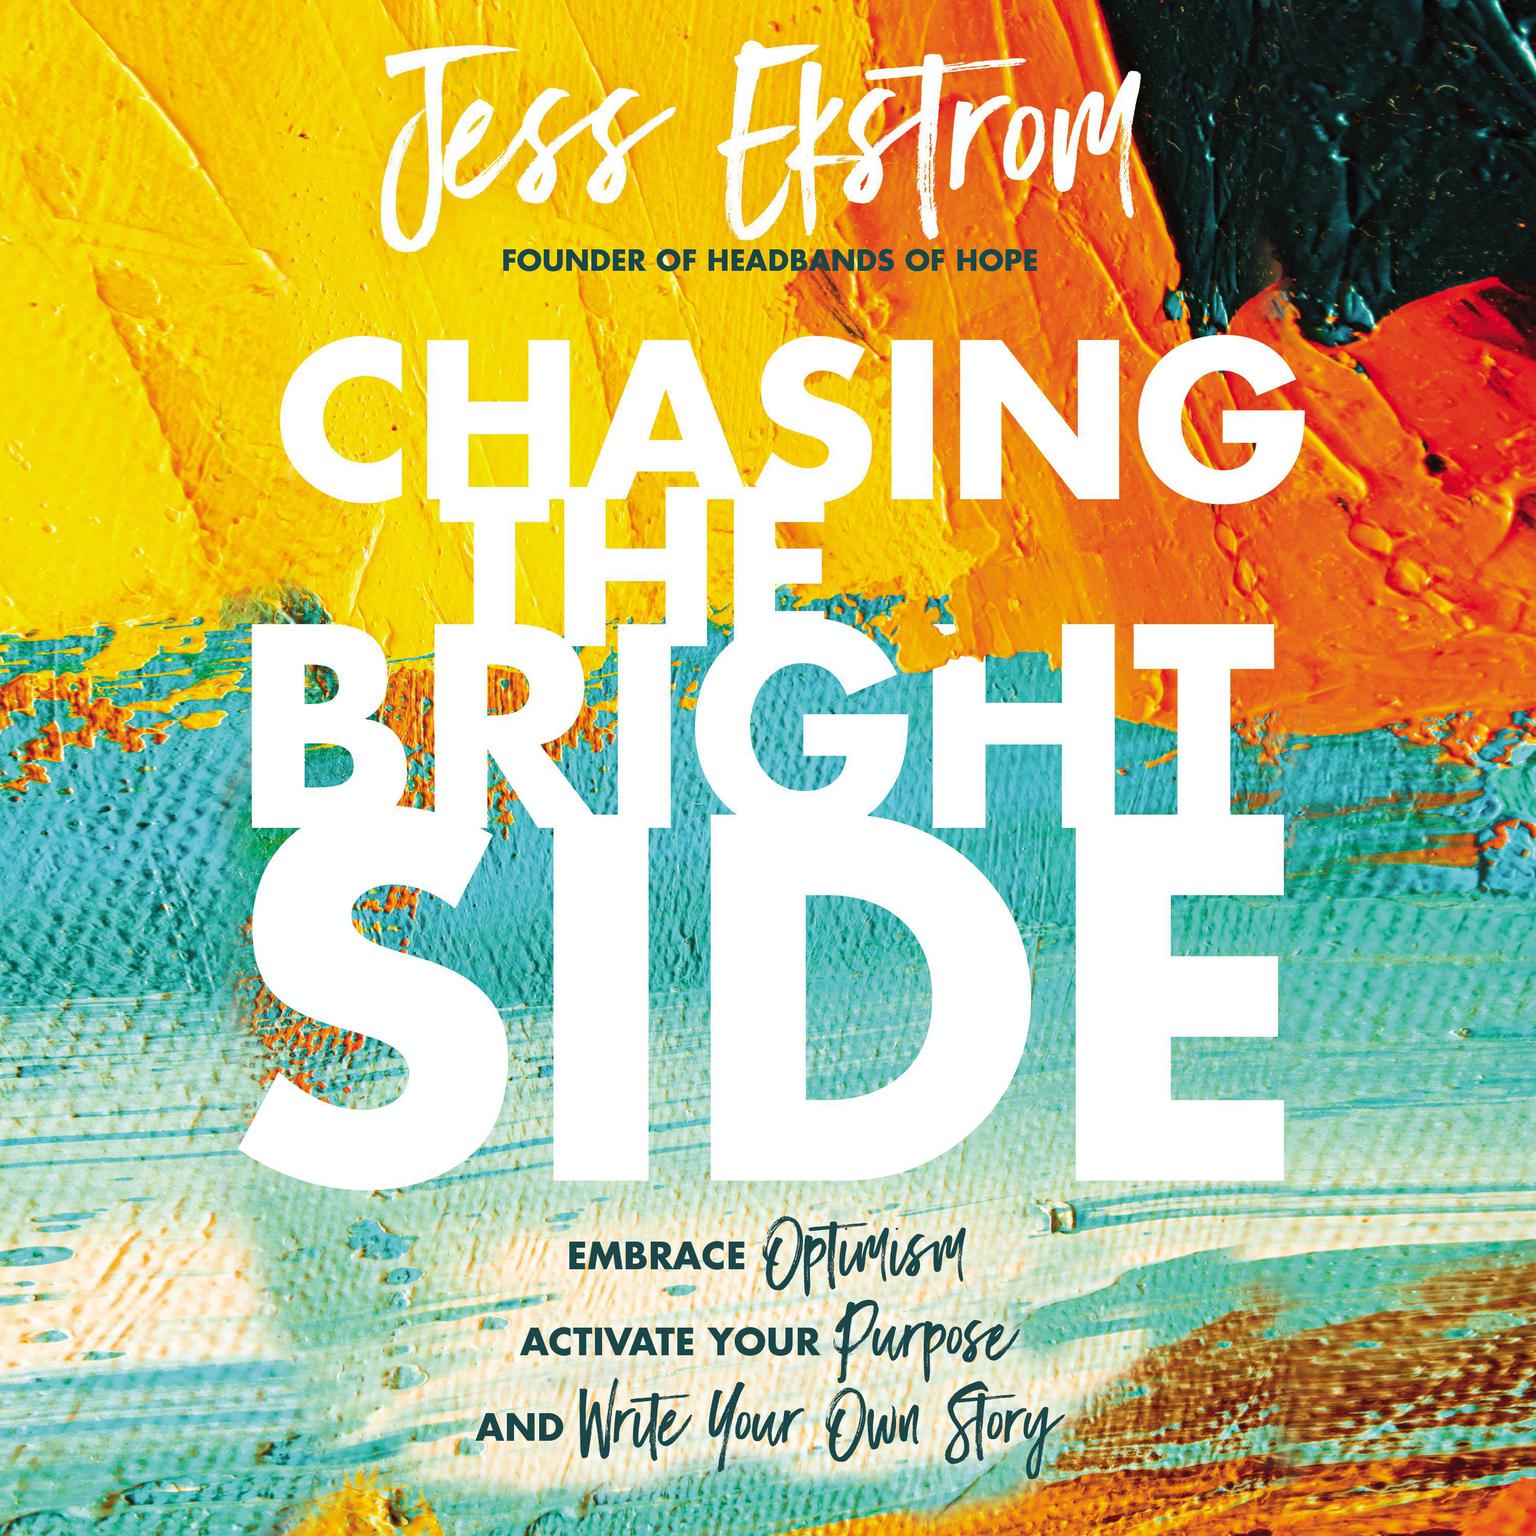 Chasing the Bright Side: Embrace Optimism, Activate Your Purpose, and Write Your Own Story Audiobook, by Jess Ekstrom